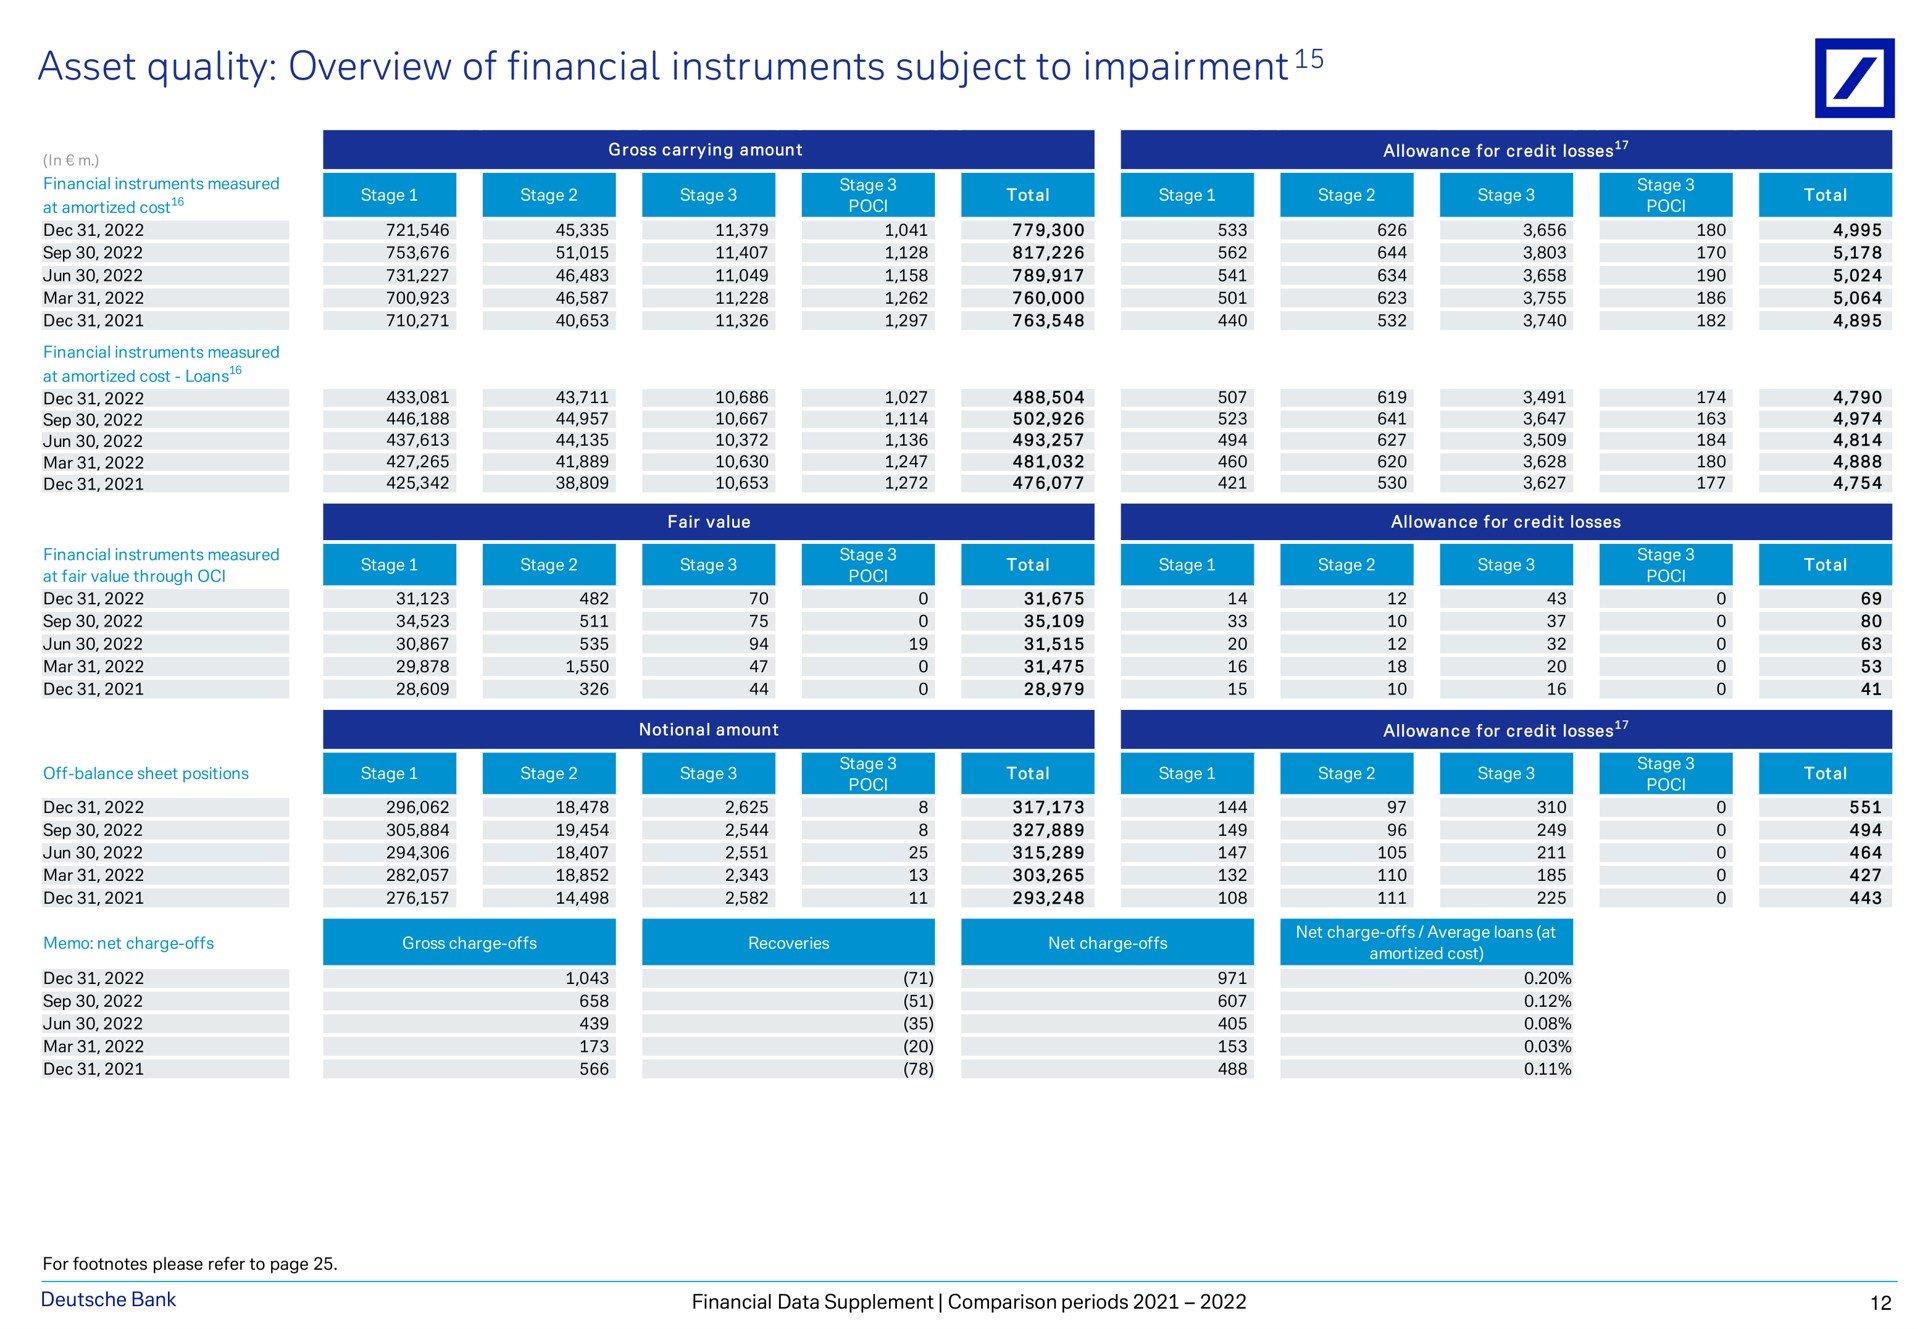 asset quality overview of financial instruments subject to impairment | Deutsche Bank